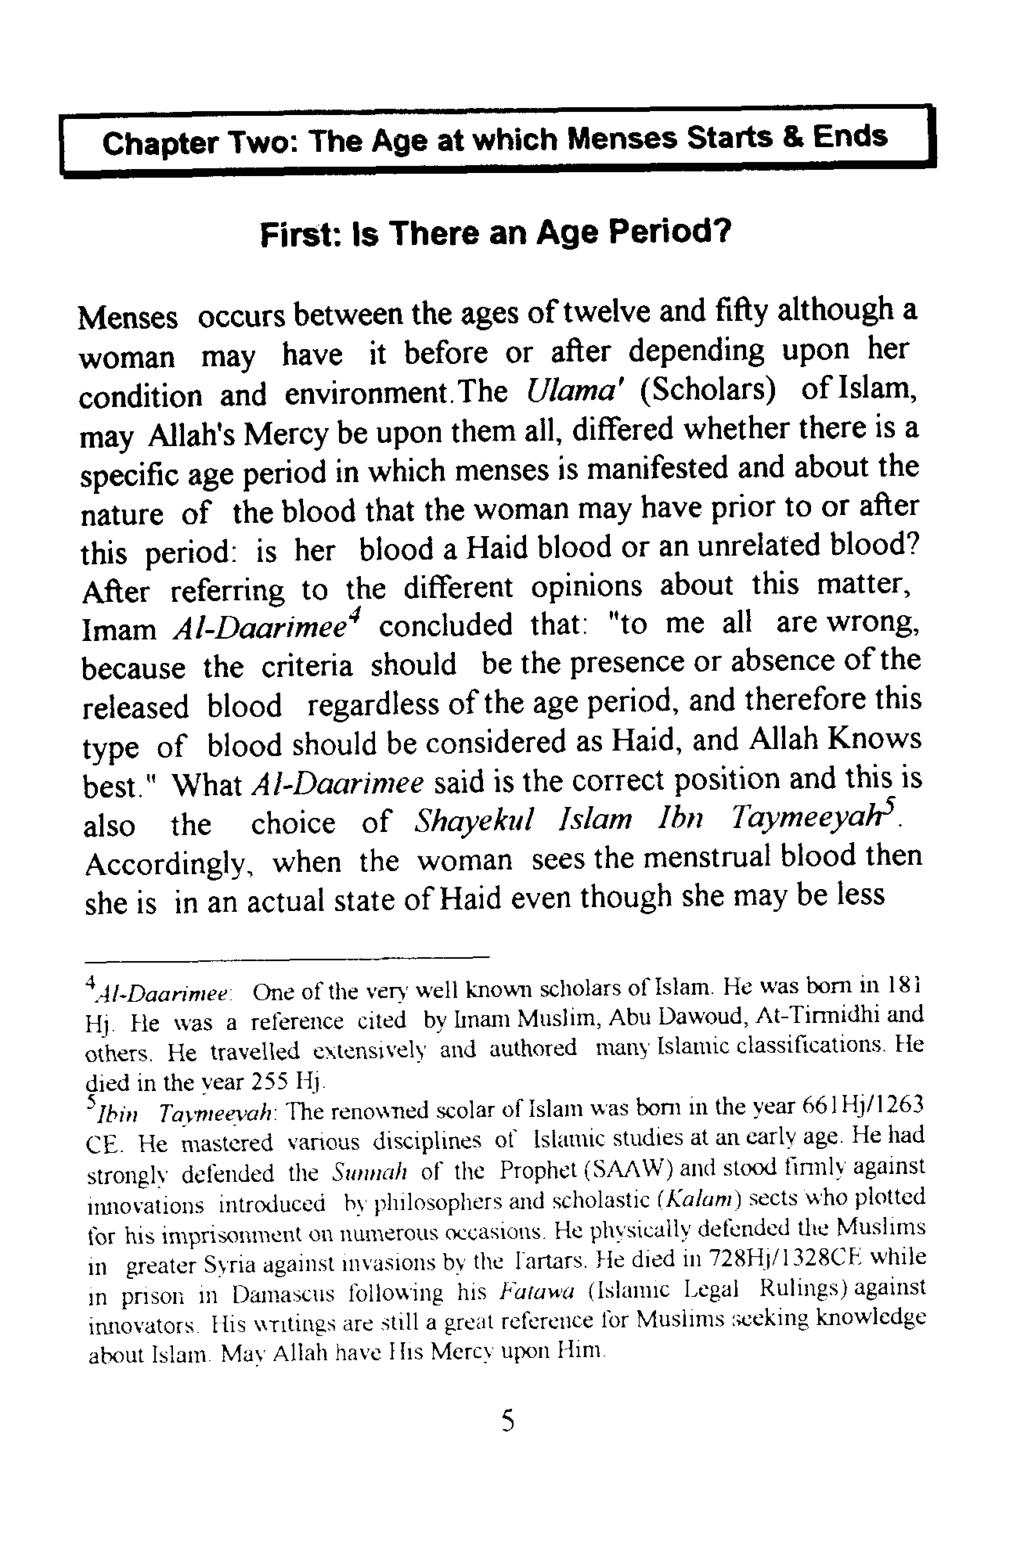 Chapter Two: The Age at which Menses Starts & Ends First: ls There an Age Period?